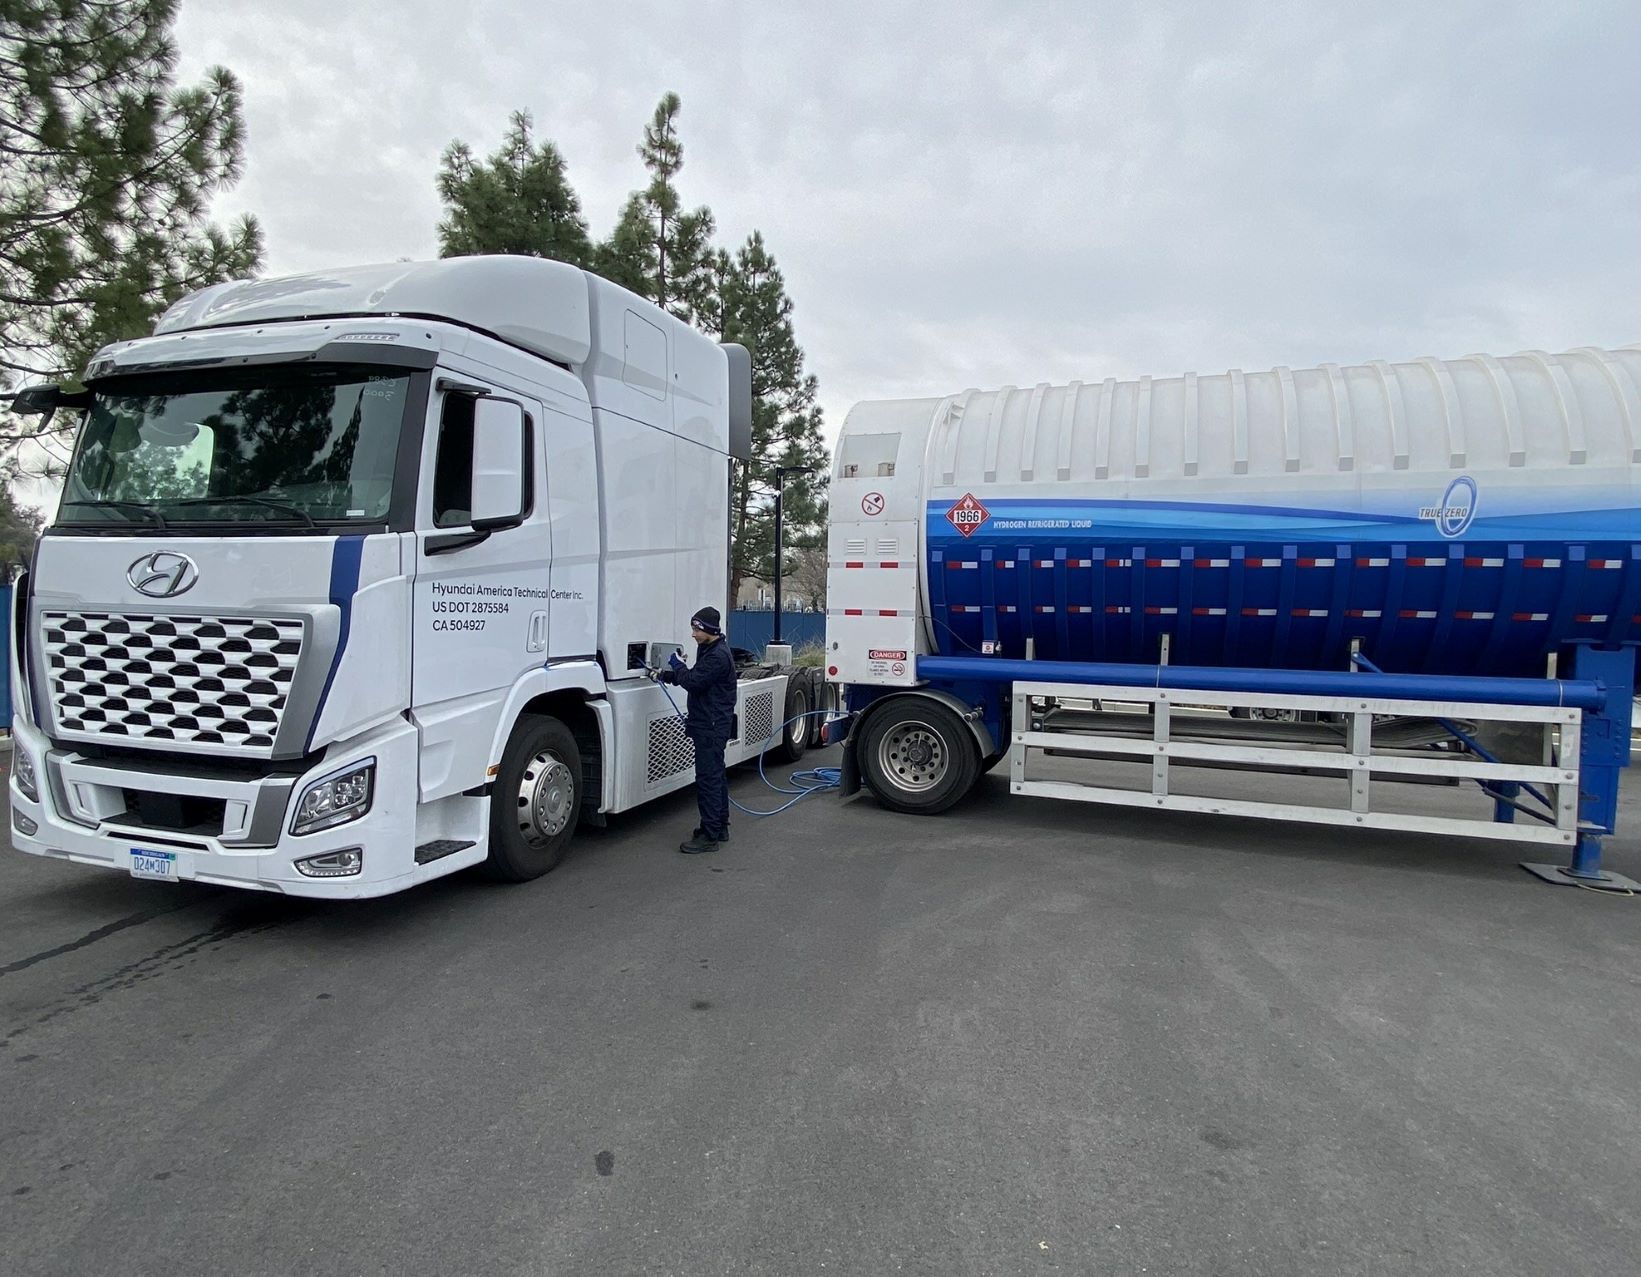 A Hyundai Class 8 Xcient fuel cell truck fuels at a First Element high capacity mobile refueller, part of a pilot program for several other heavy duty fuel cell vehicle manufacturers